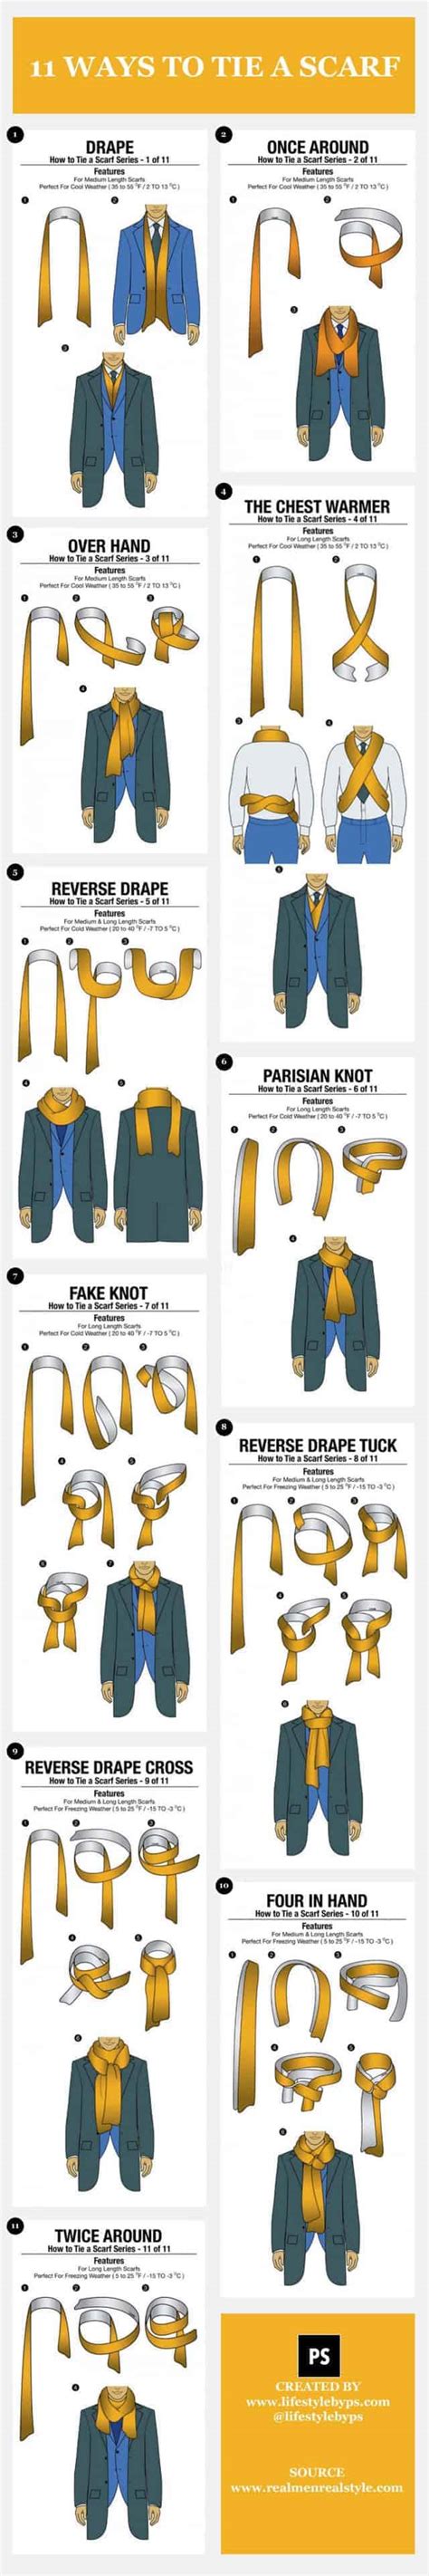 How to tie mens scarf. 11 Simple Ways to Tie a Scarf | Daily Infographic